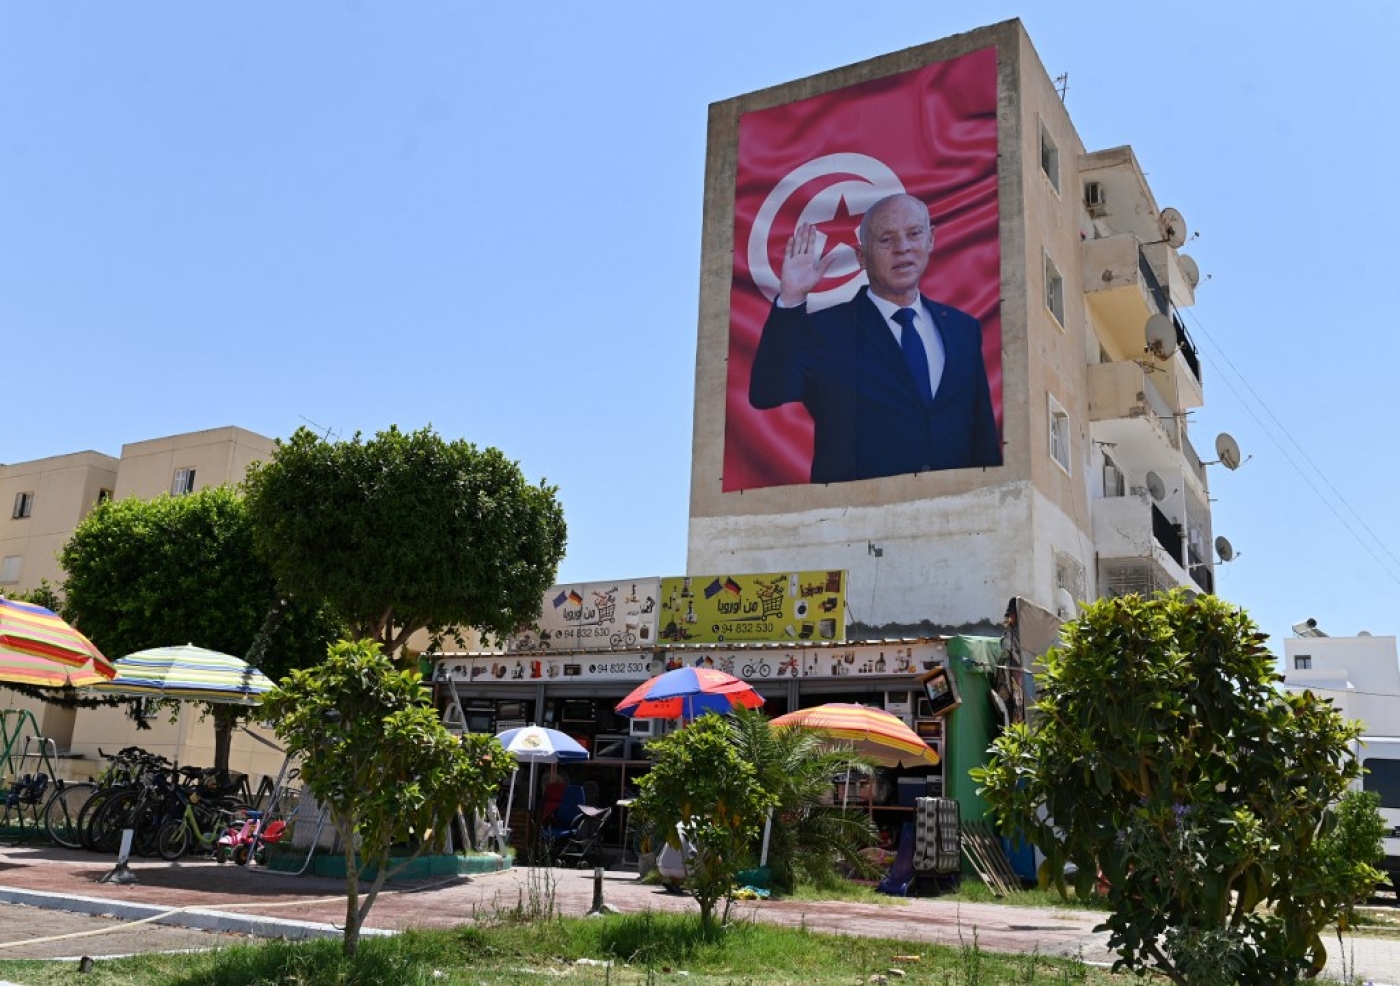 A billboard depicting Tunisia's President Kais Saied hangs on the side of a building in the east-central city of Kairouan, 26 July 2022 (AFP)